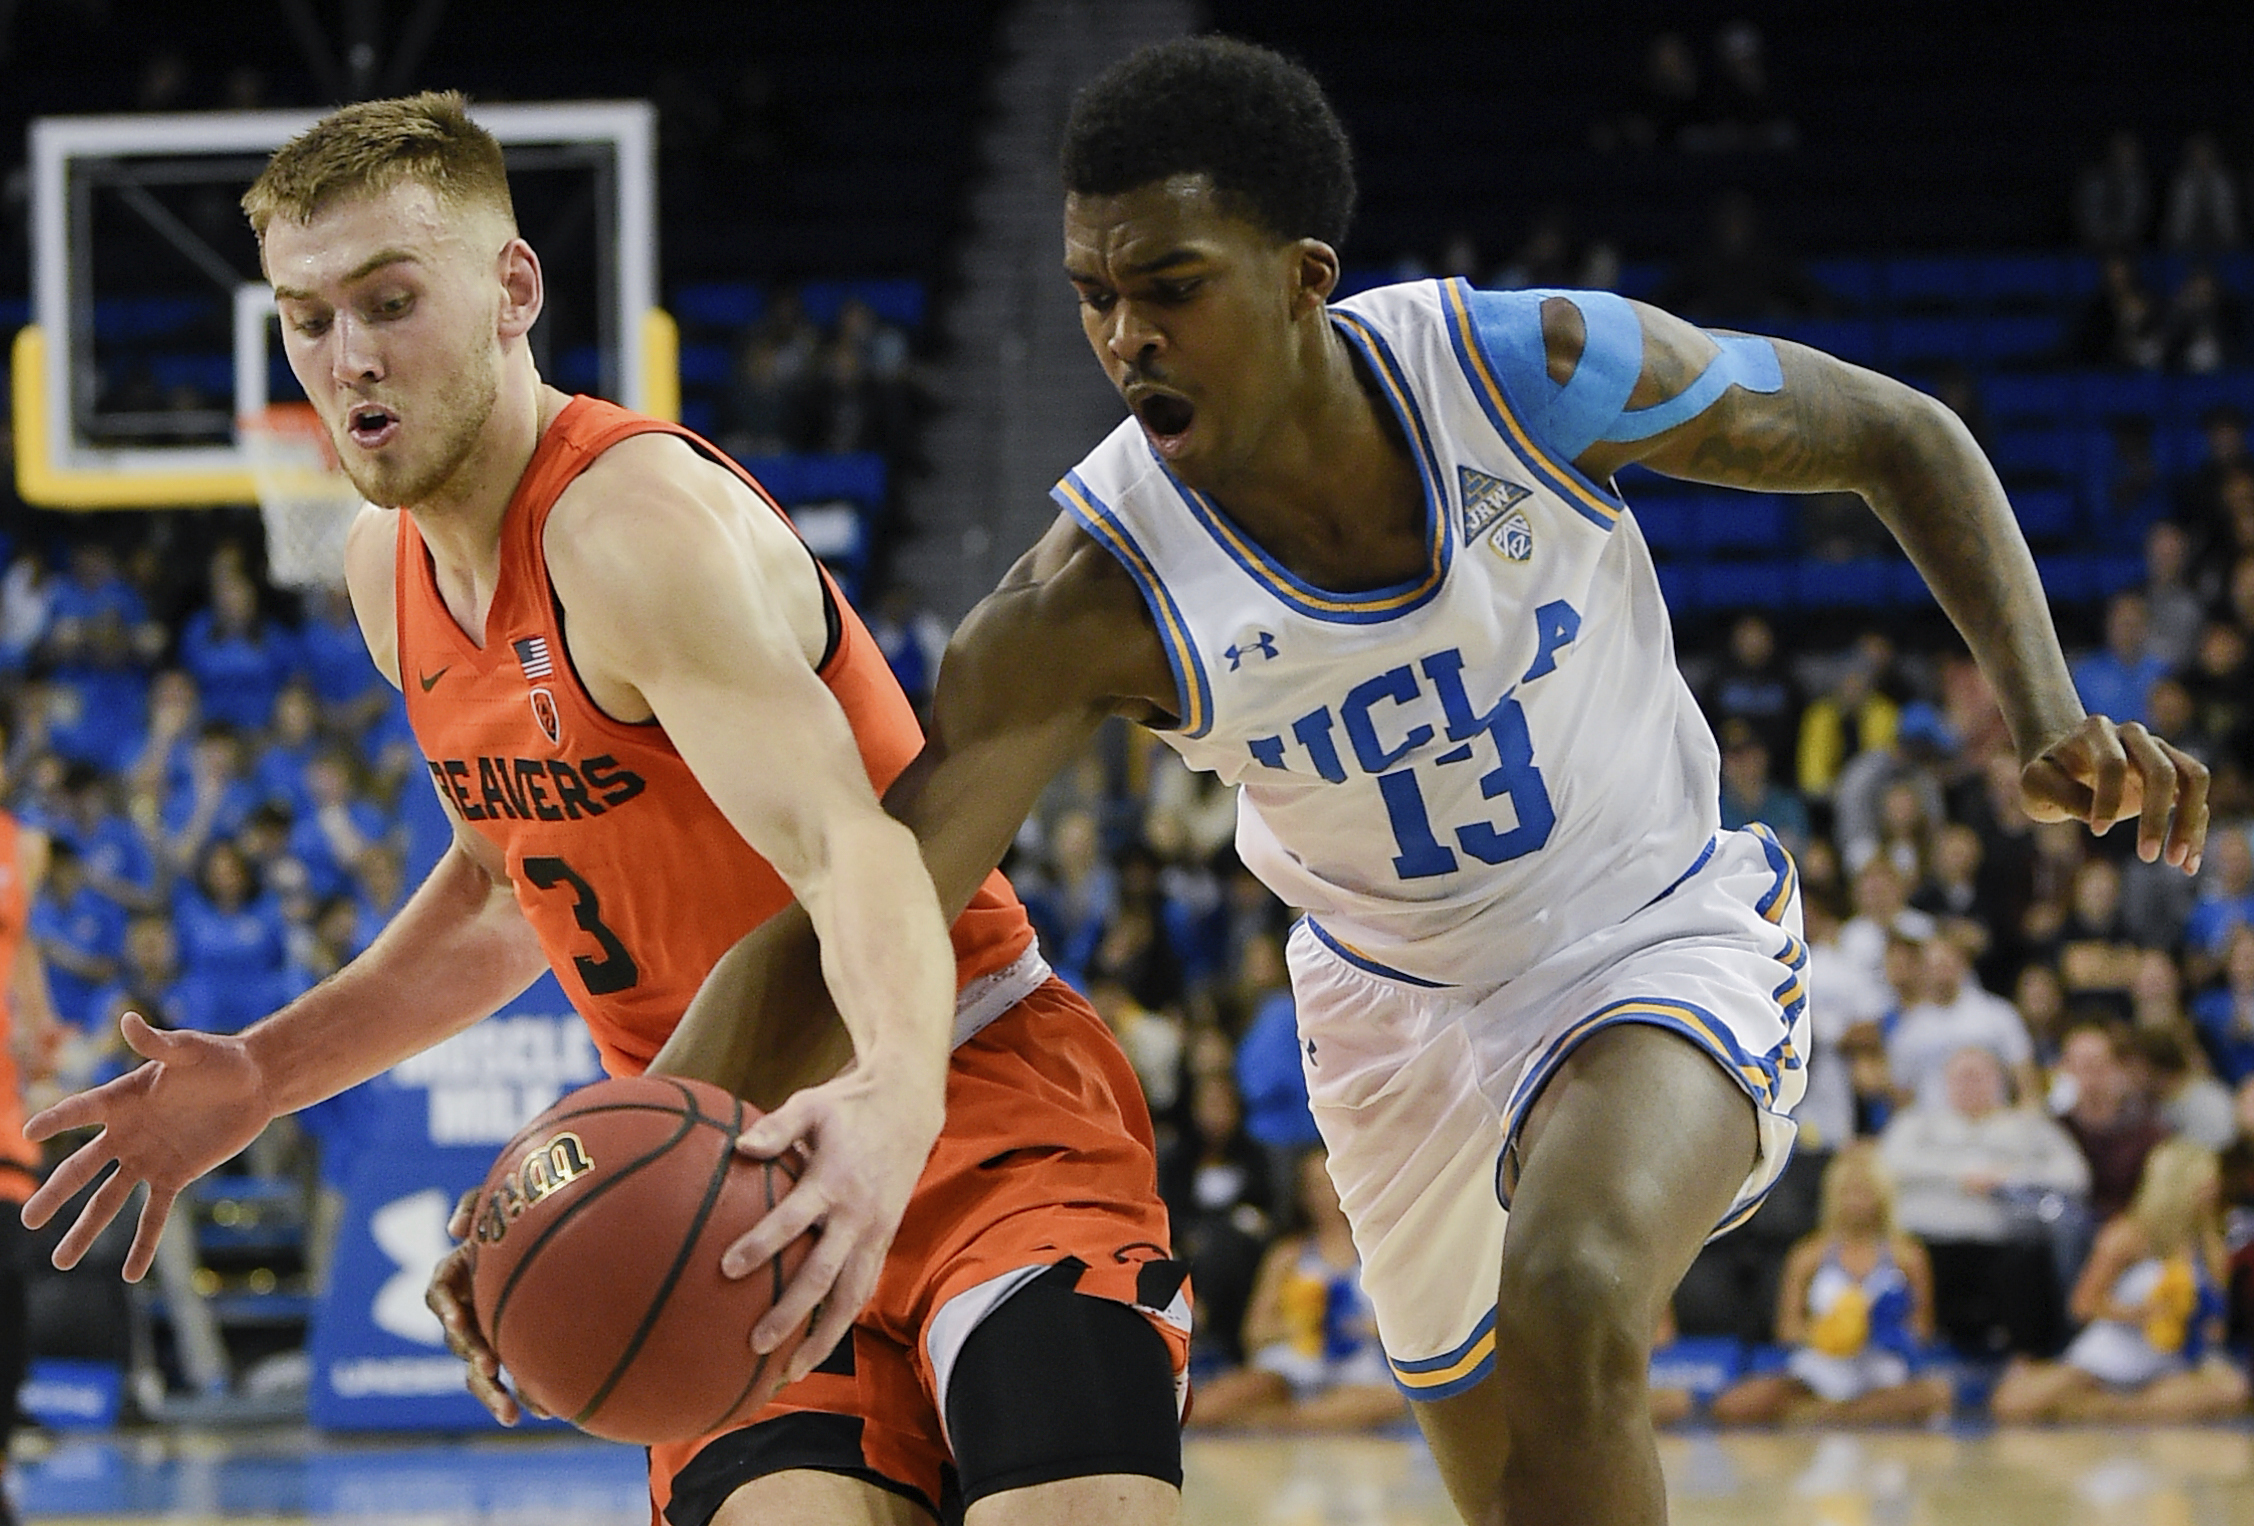 UCLA hangs on to beat Oregon State 68-67 after blowing lead